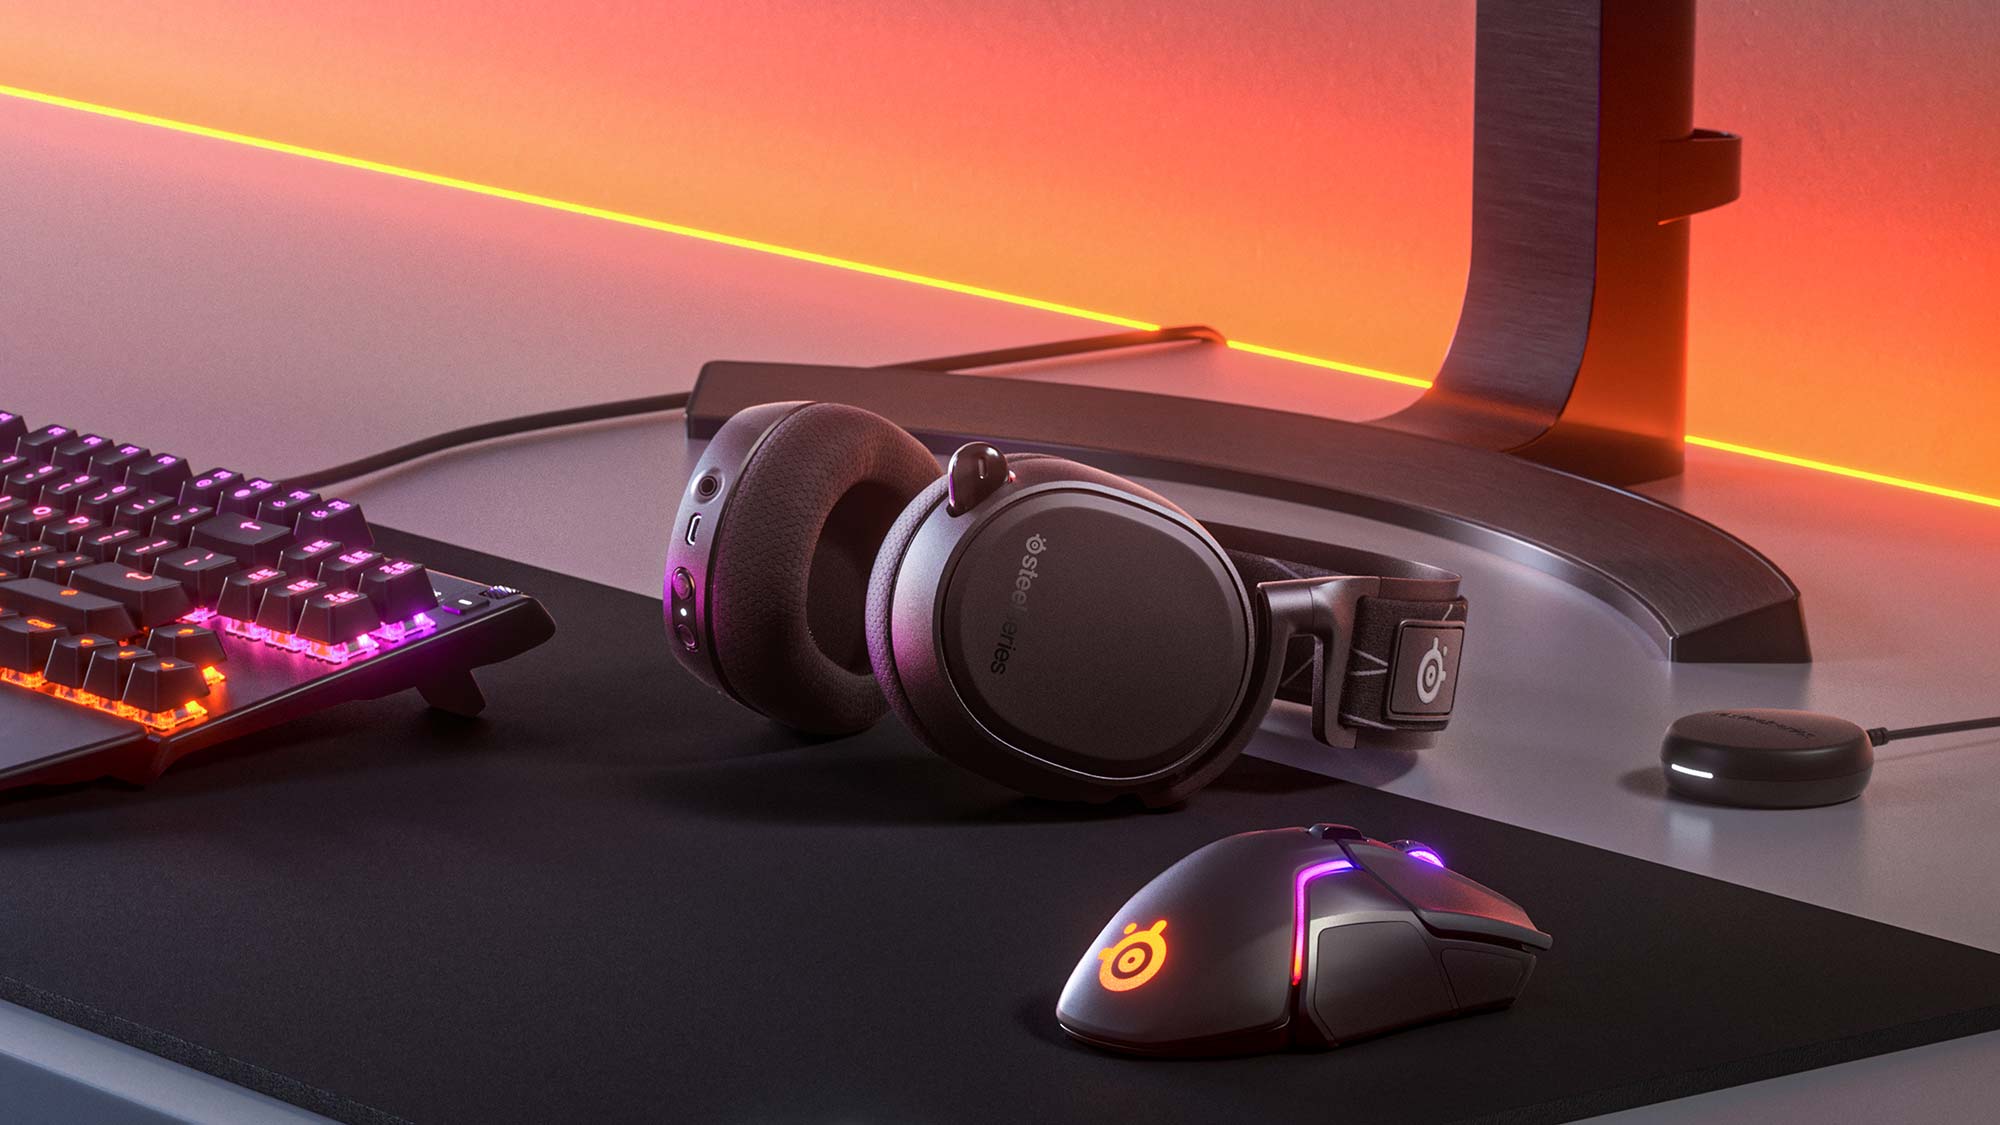 The 5 Best Gaming Headsets Under $100 Of 2022 [Buyer’s Guide]